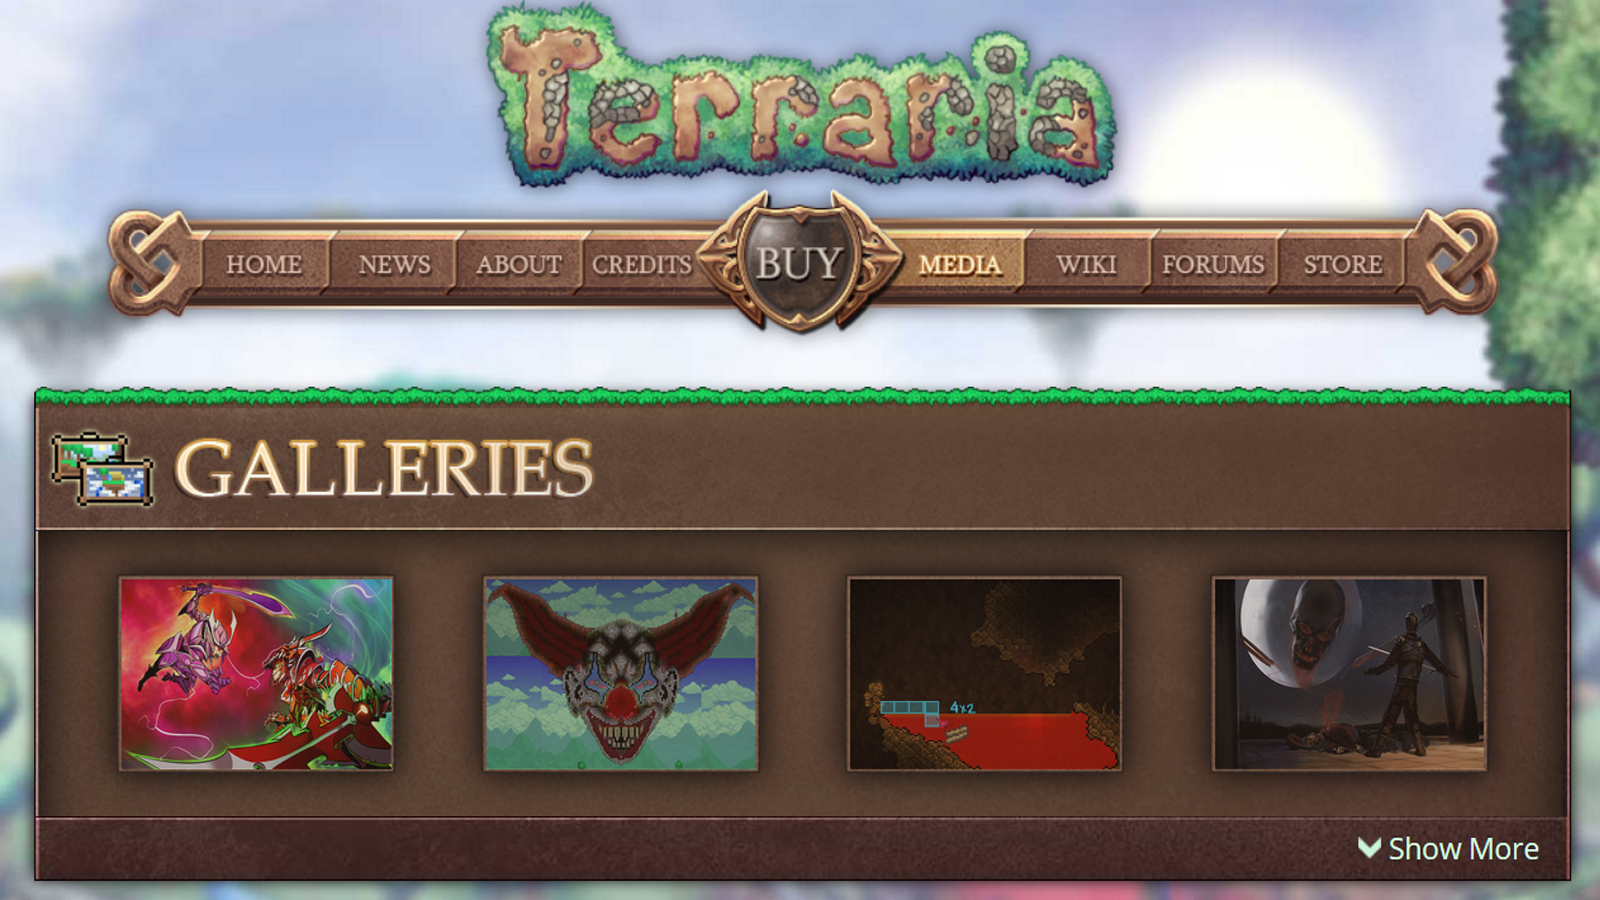 Find pricing, reviews and other details about Terraria